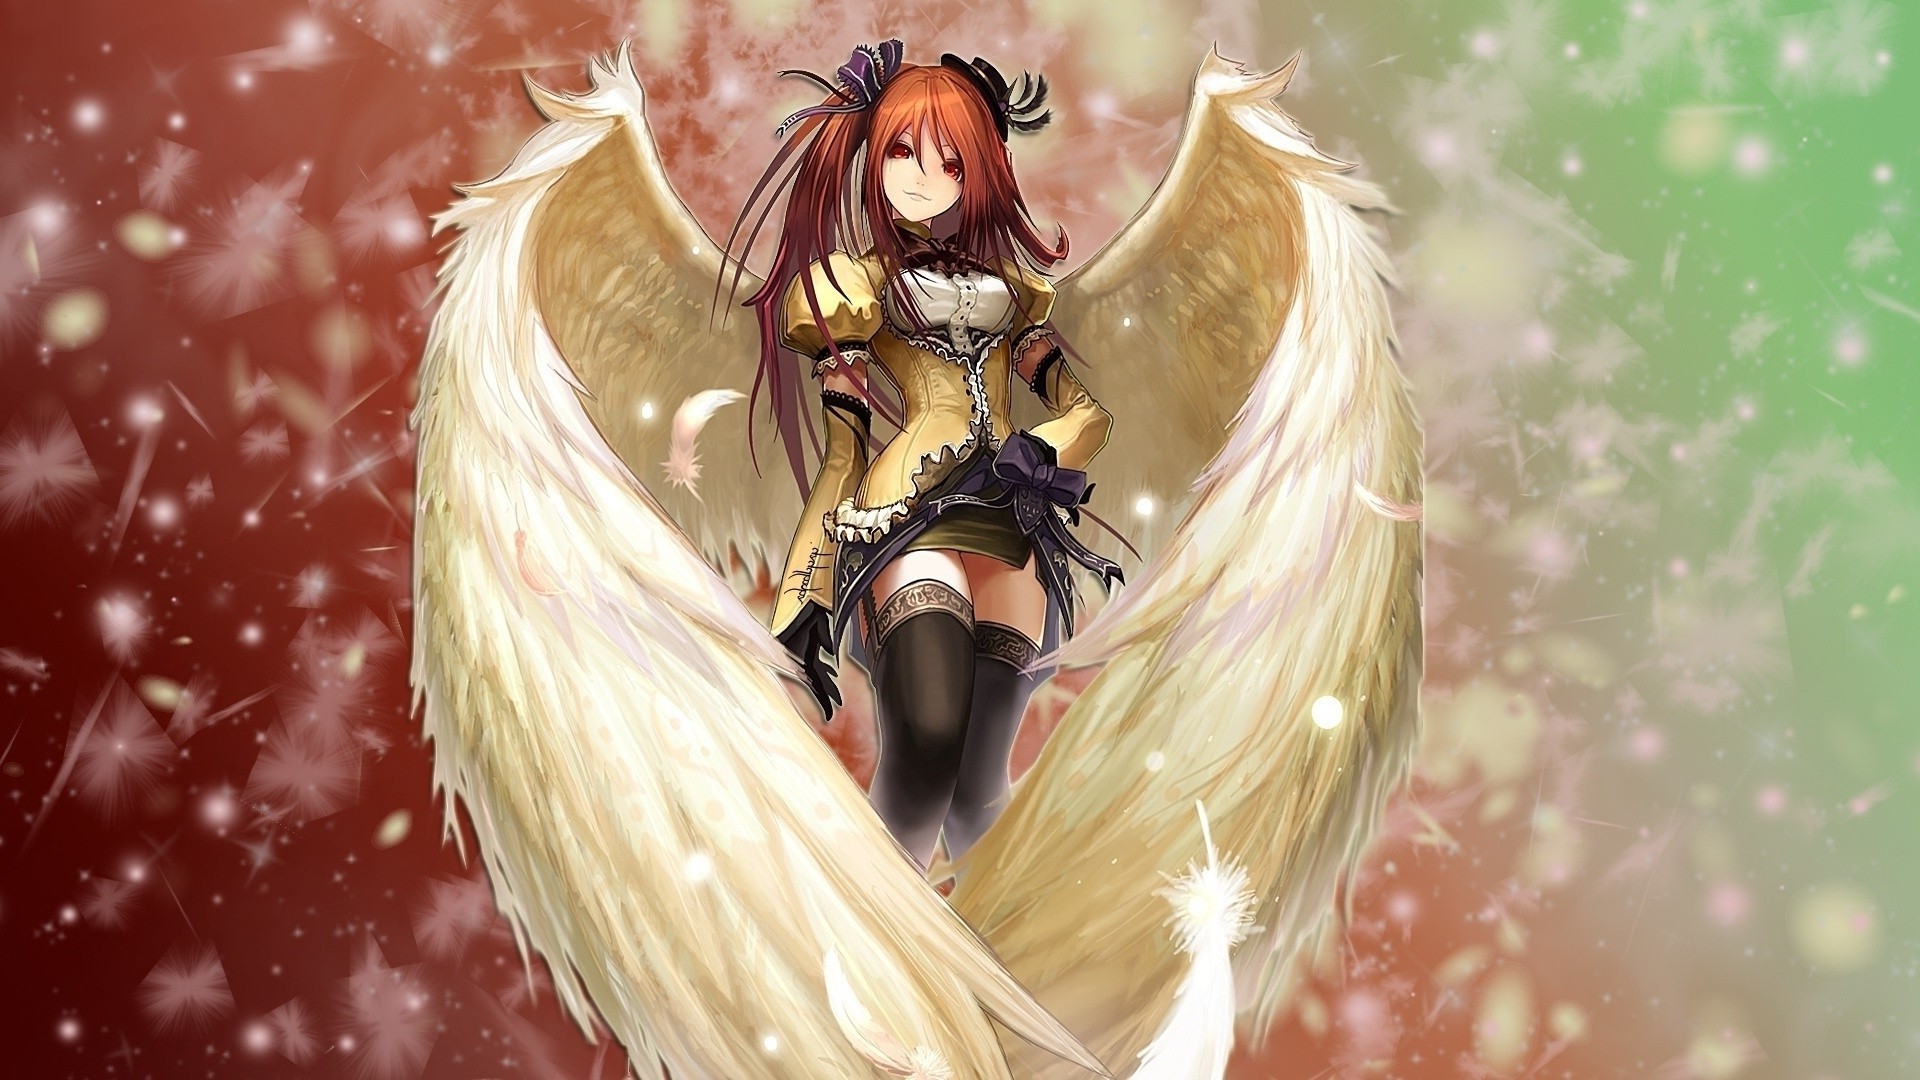 awesome-deer439: cute anime girl whit wings-demhanvico.com.vn